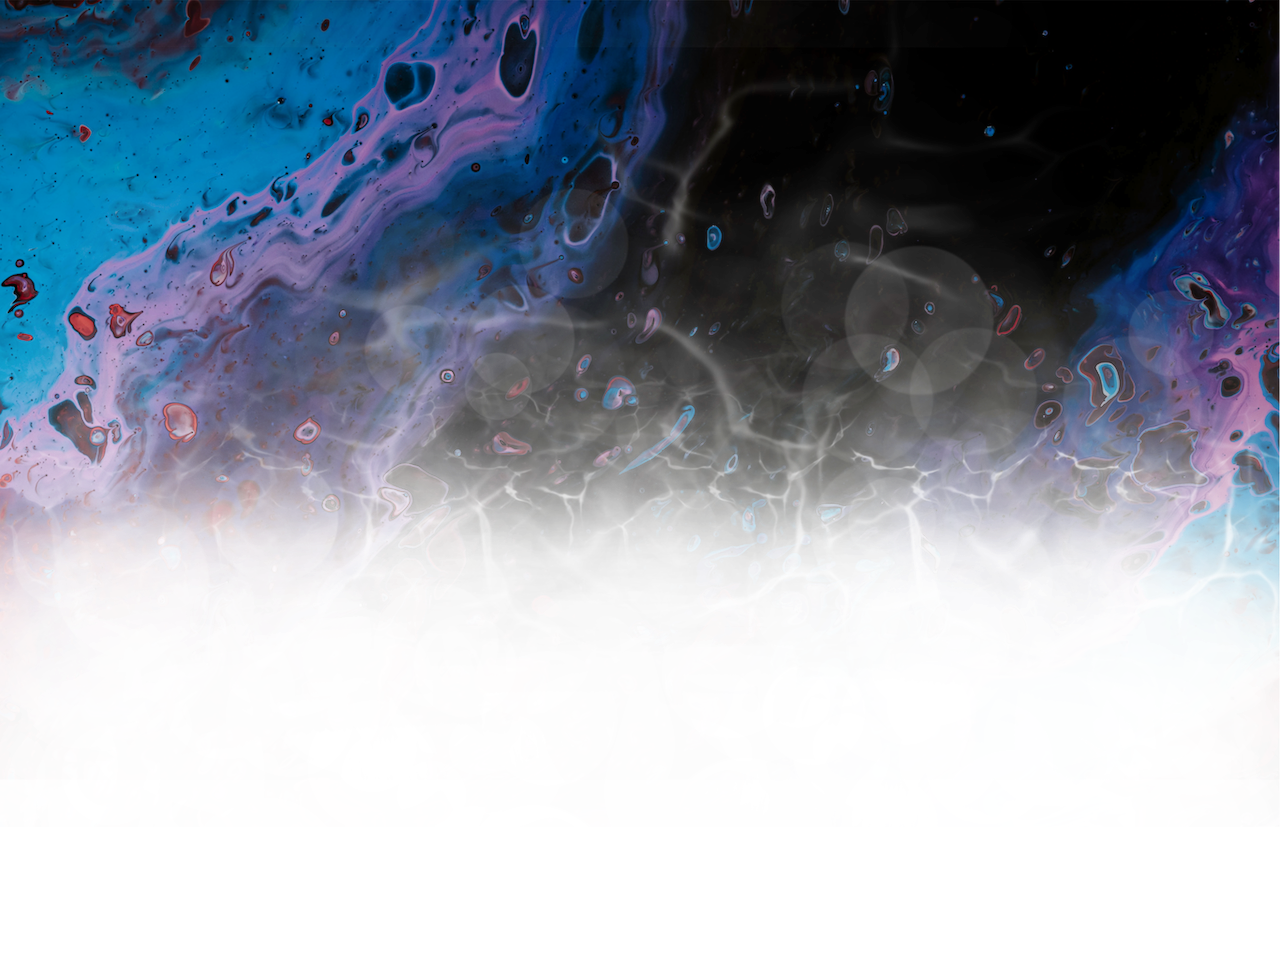 Art of a paint spill by Pavel @ Unsplash